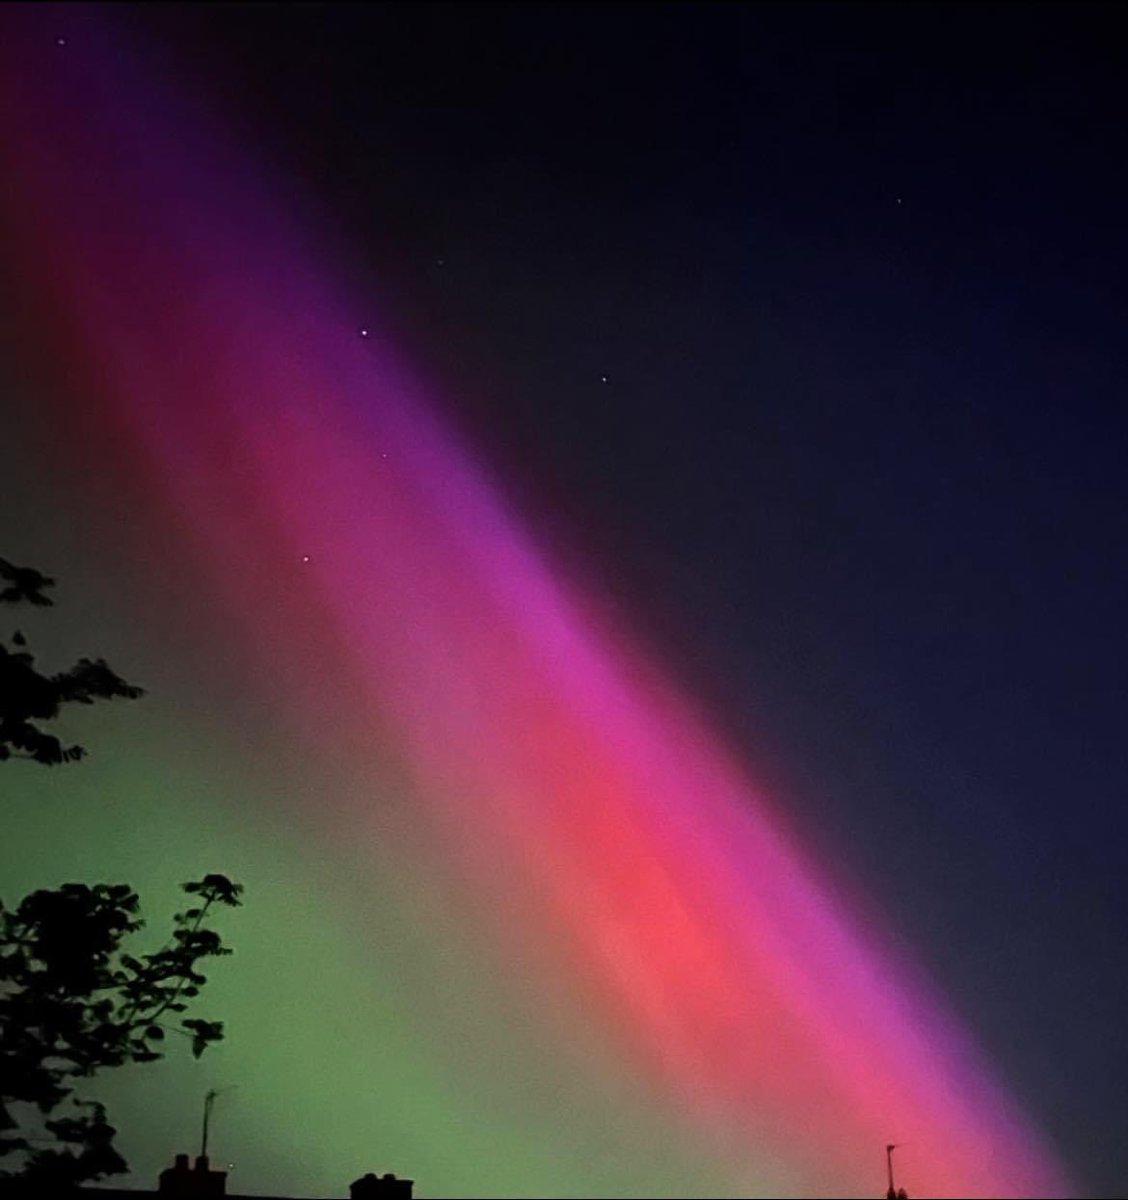 Did you see the #auroraborealis last night ? We would love to see your photos. Aurora displays occur when charged particles collide with gases in the Earth’s atmosphere around the magnetic poles.